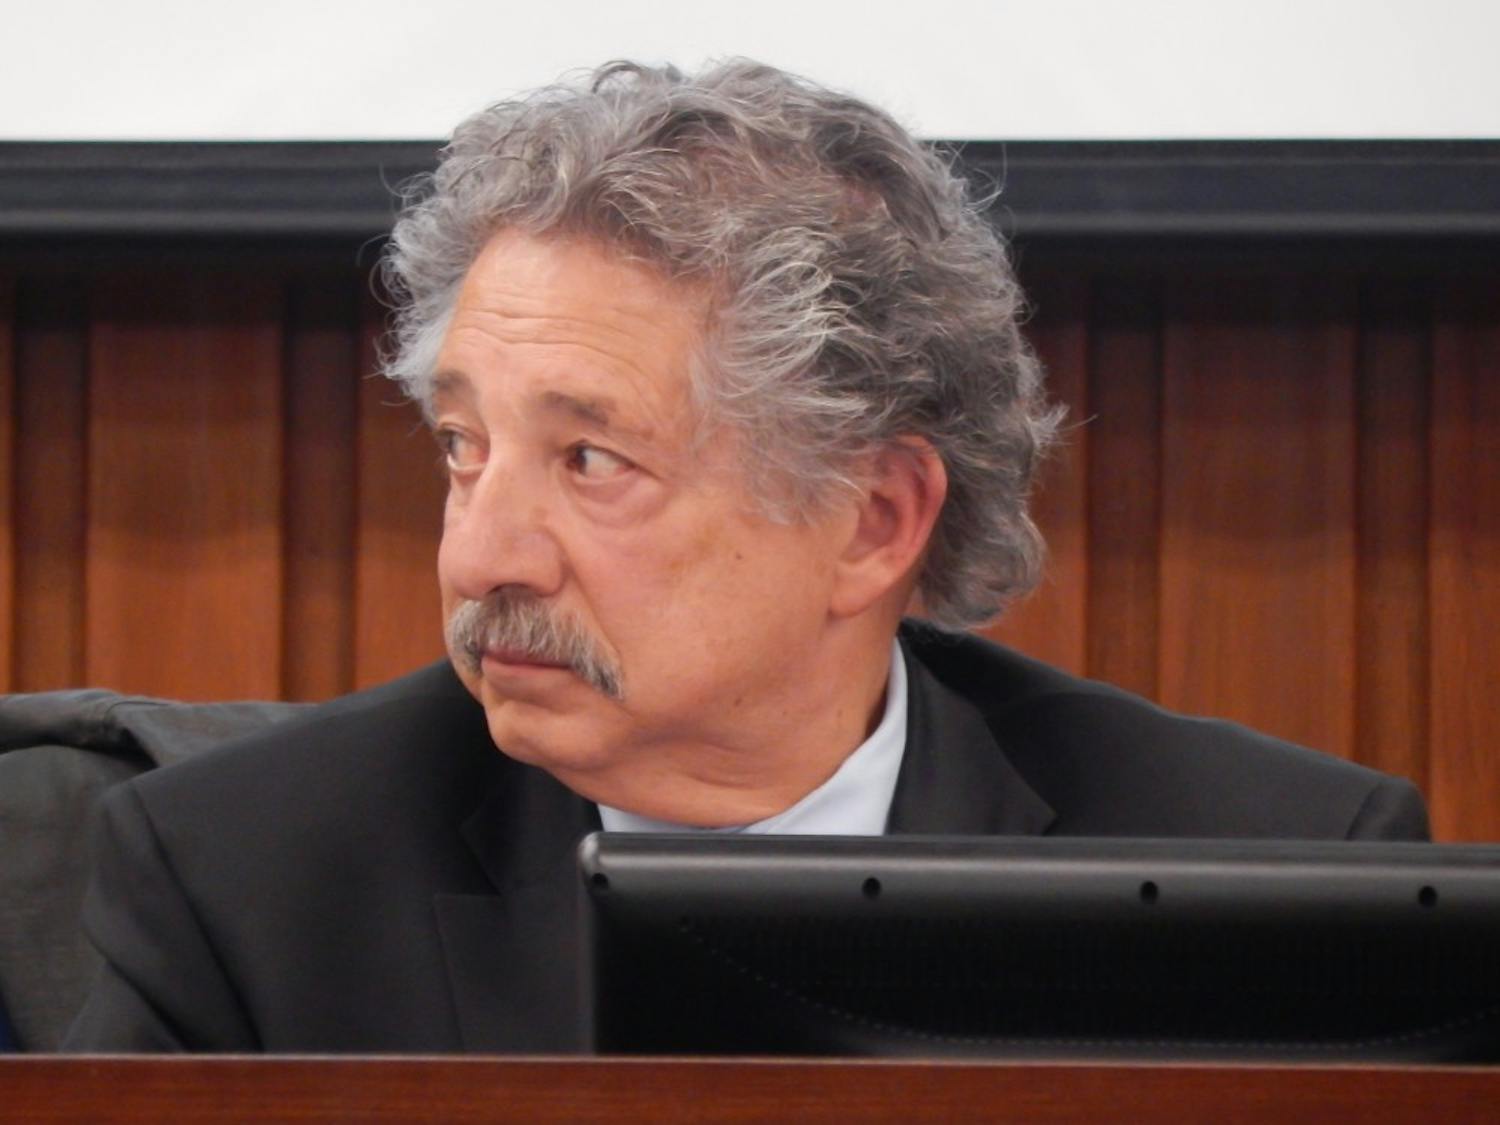 Mayor Paul Soglin said Madison’s policies regarding immigrants won’t change following the election and the city will stay in a coalition of city’s that protects citizens regardless of status.